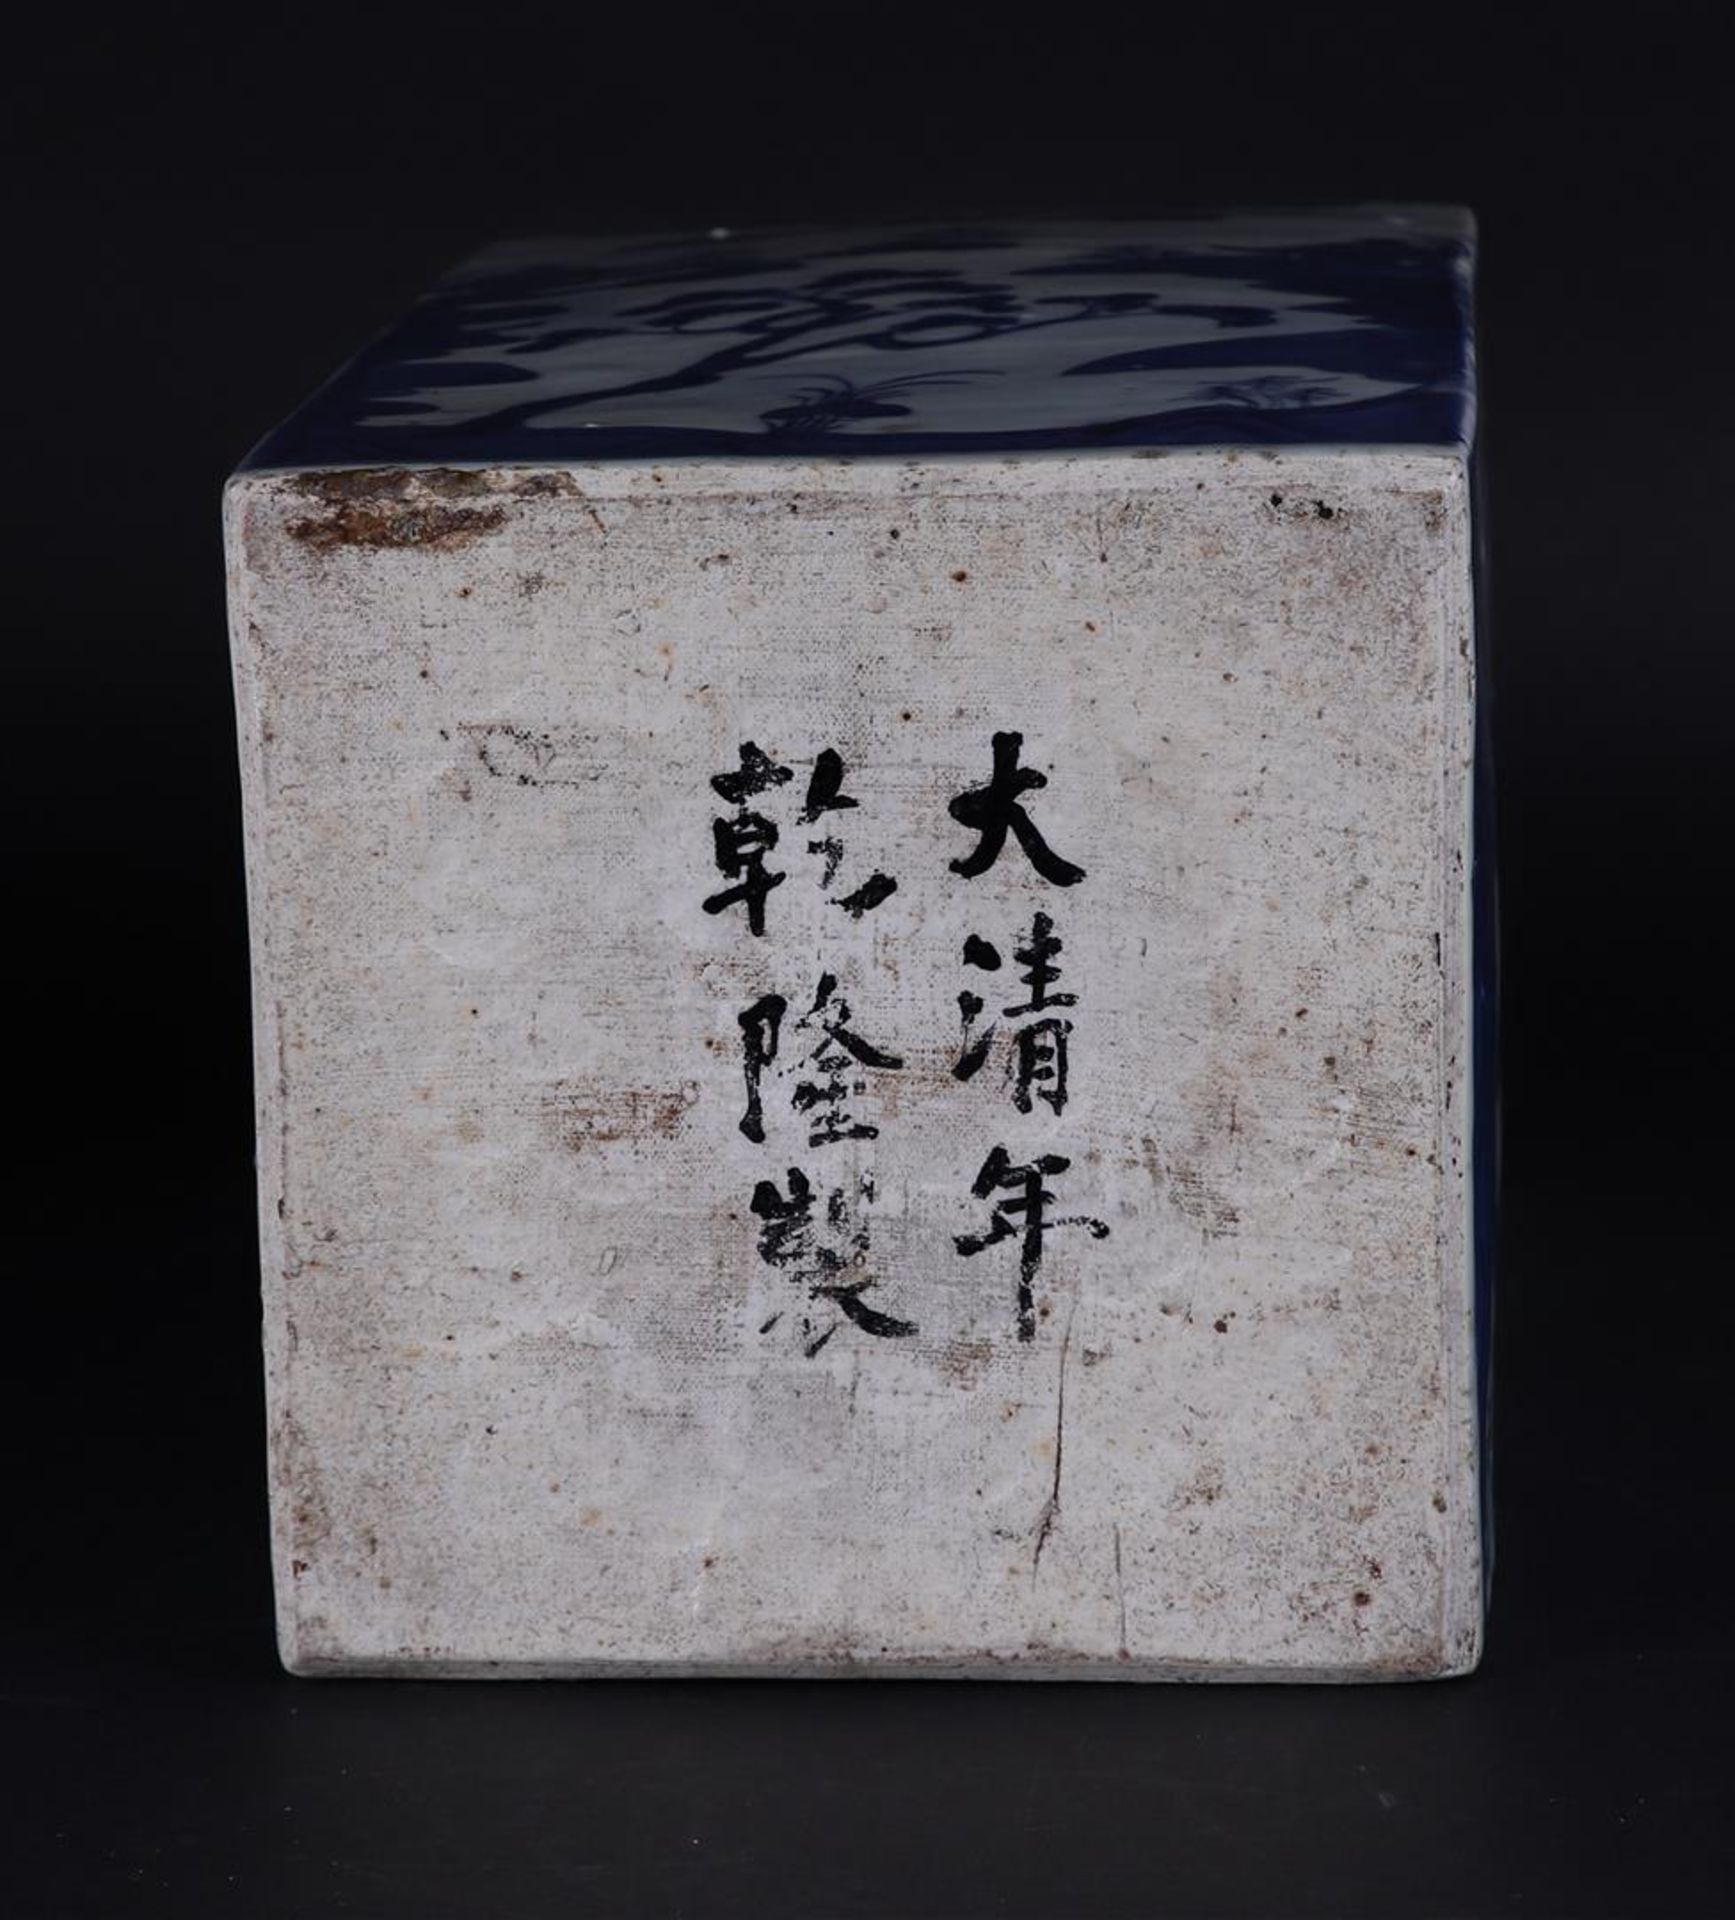 A square porcelain storage jar decorated with various landscapes. China, 19th century. - Image 6 of 6